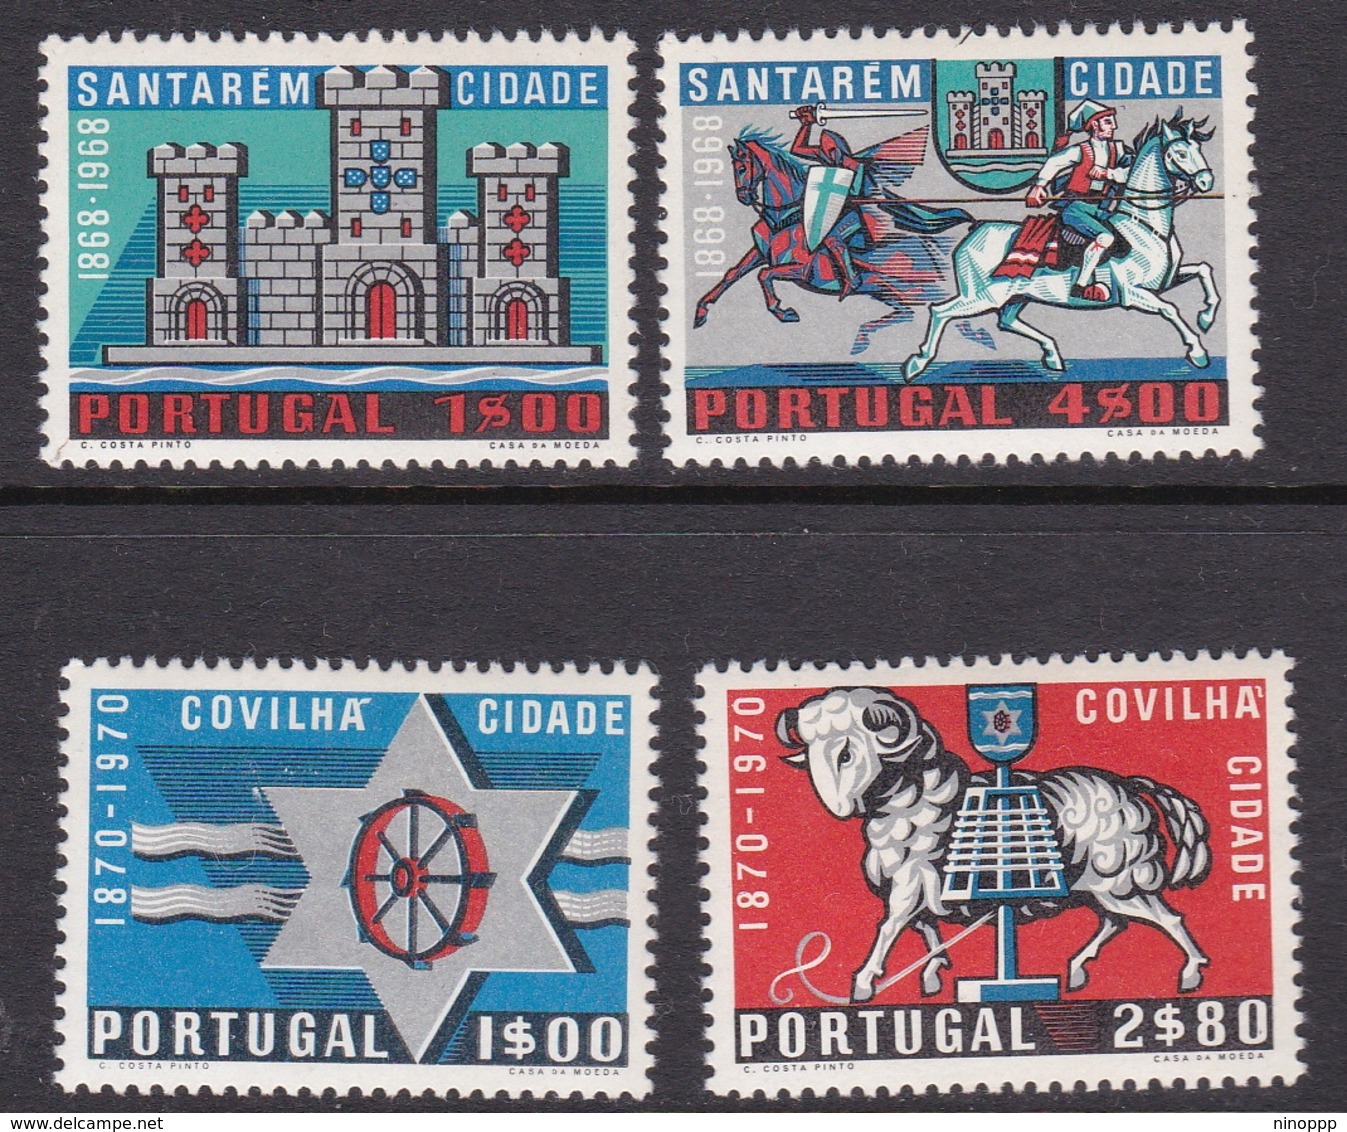 Portugal SG 1395-1398 1970 Covilha Centenaries, Mint Never Hinged - Unused Stamps